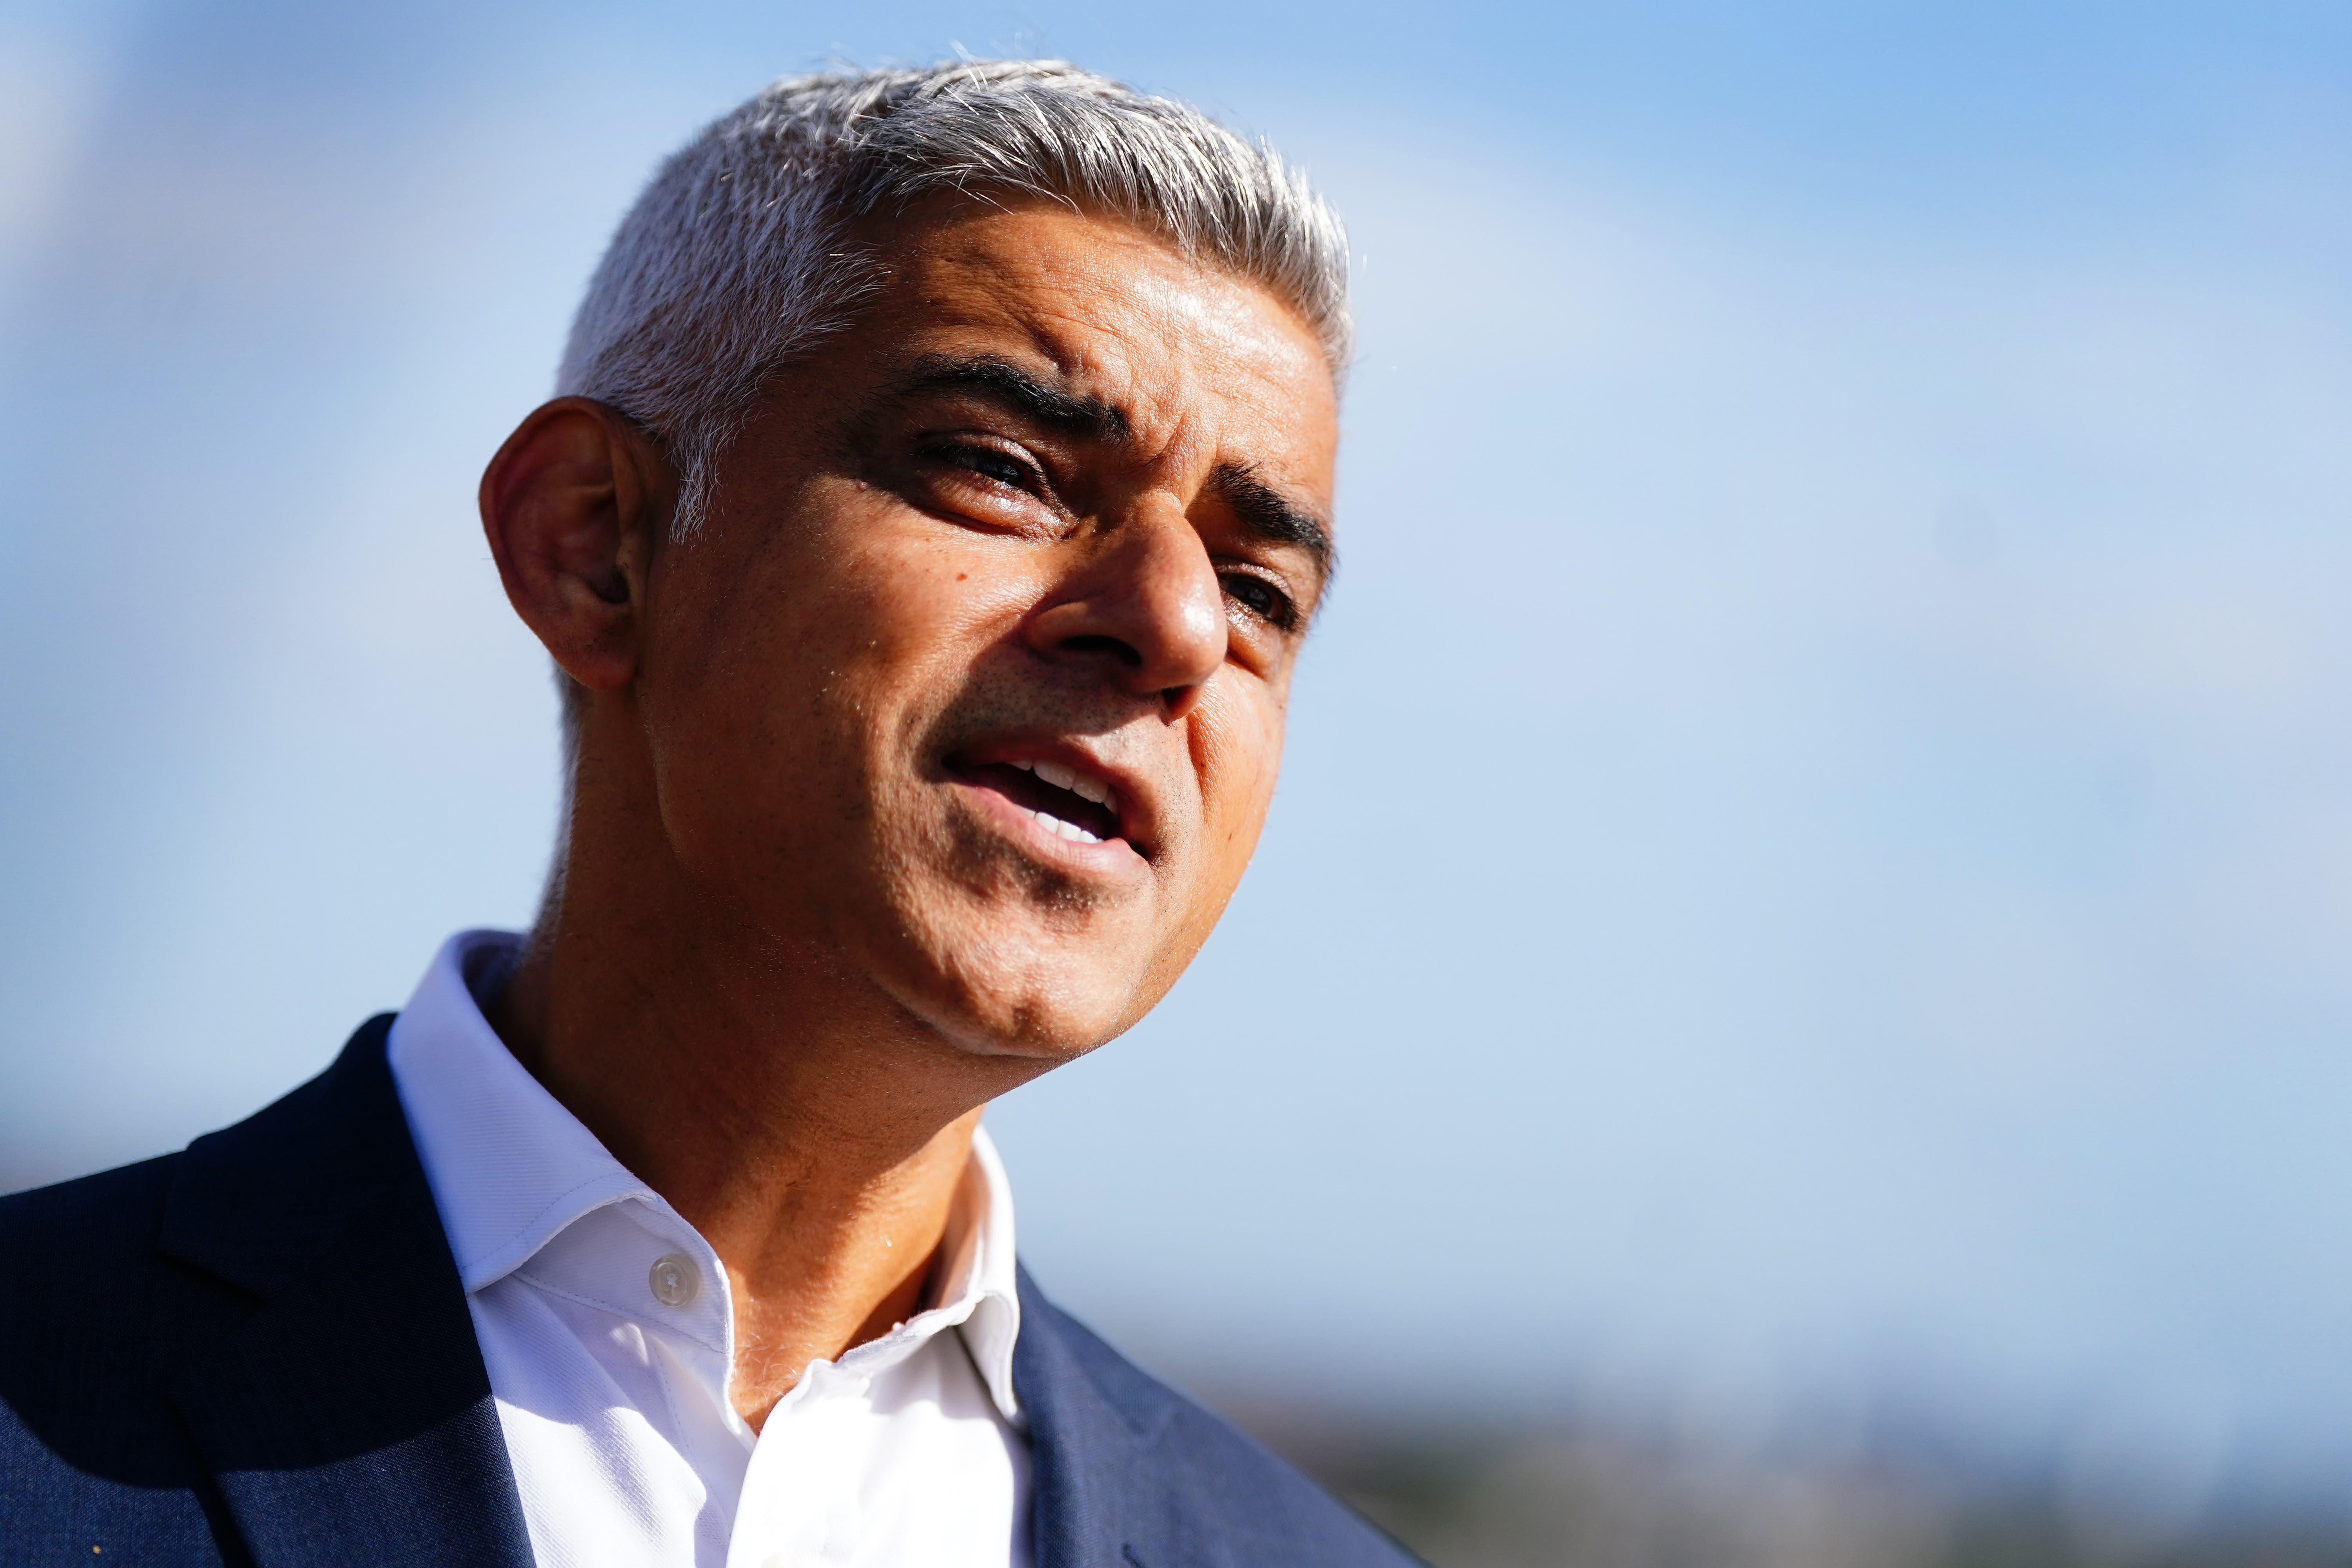 ‘I am asking for their help so that we don’t wake up in six weeks’ time to find our city’s cherished values at serious risk,’ Sadiq Khan writes in The Independent